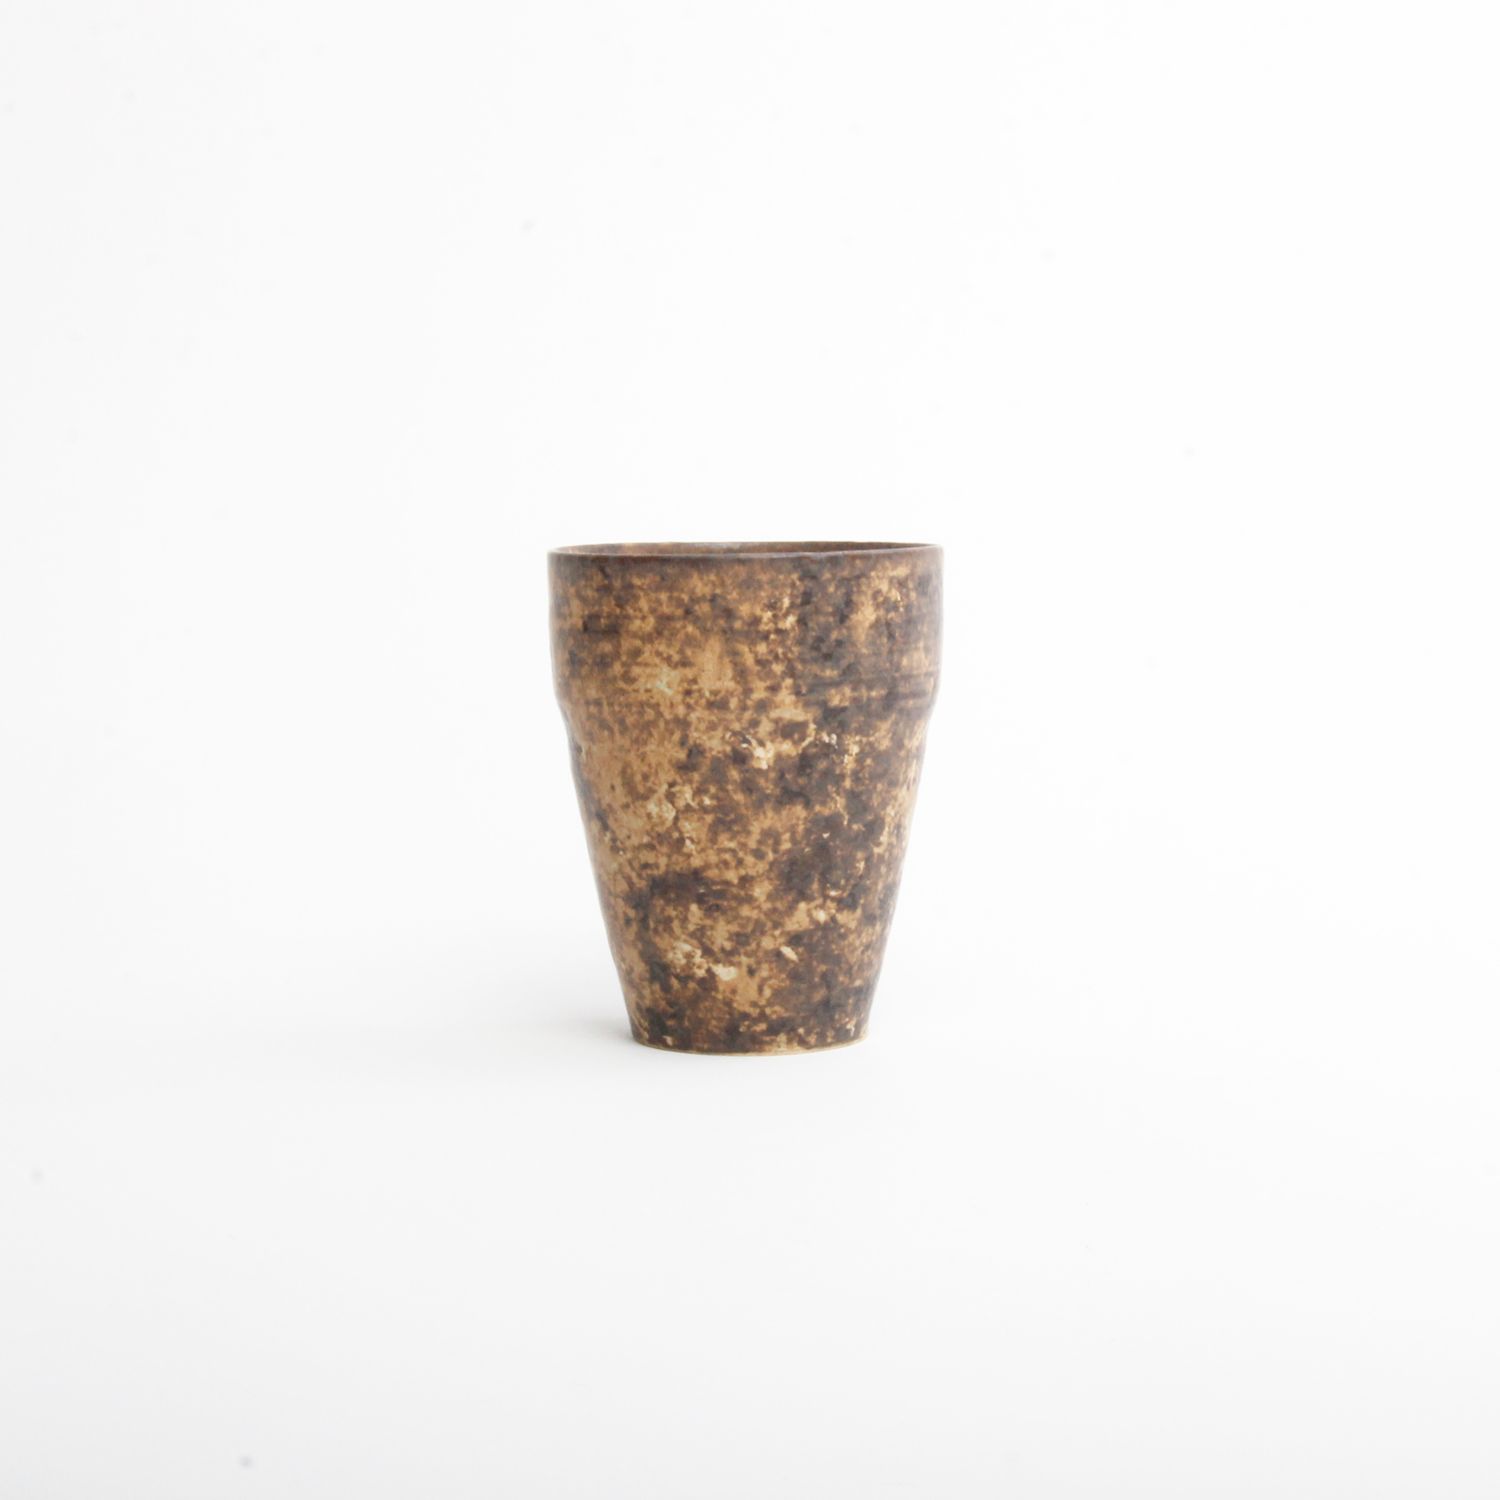 Makiko Hicher: Brown Cup Product Image 4 of 4